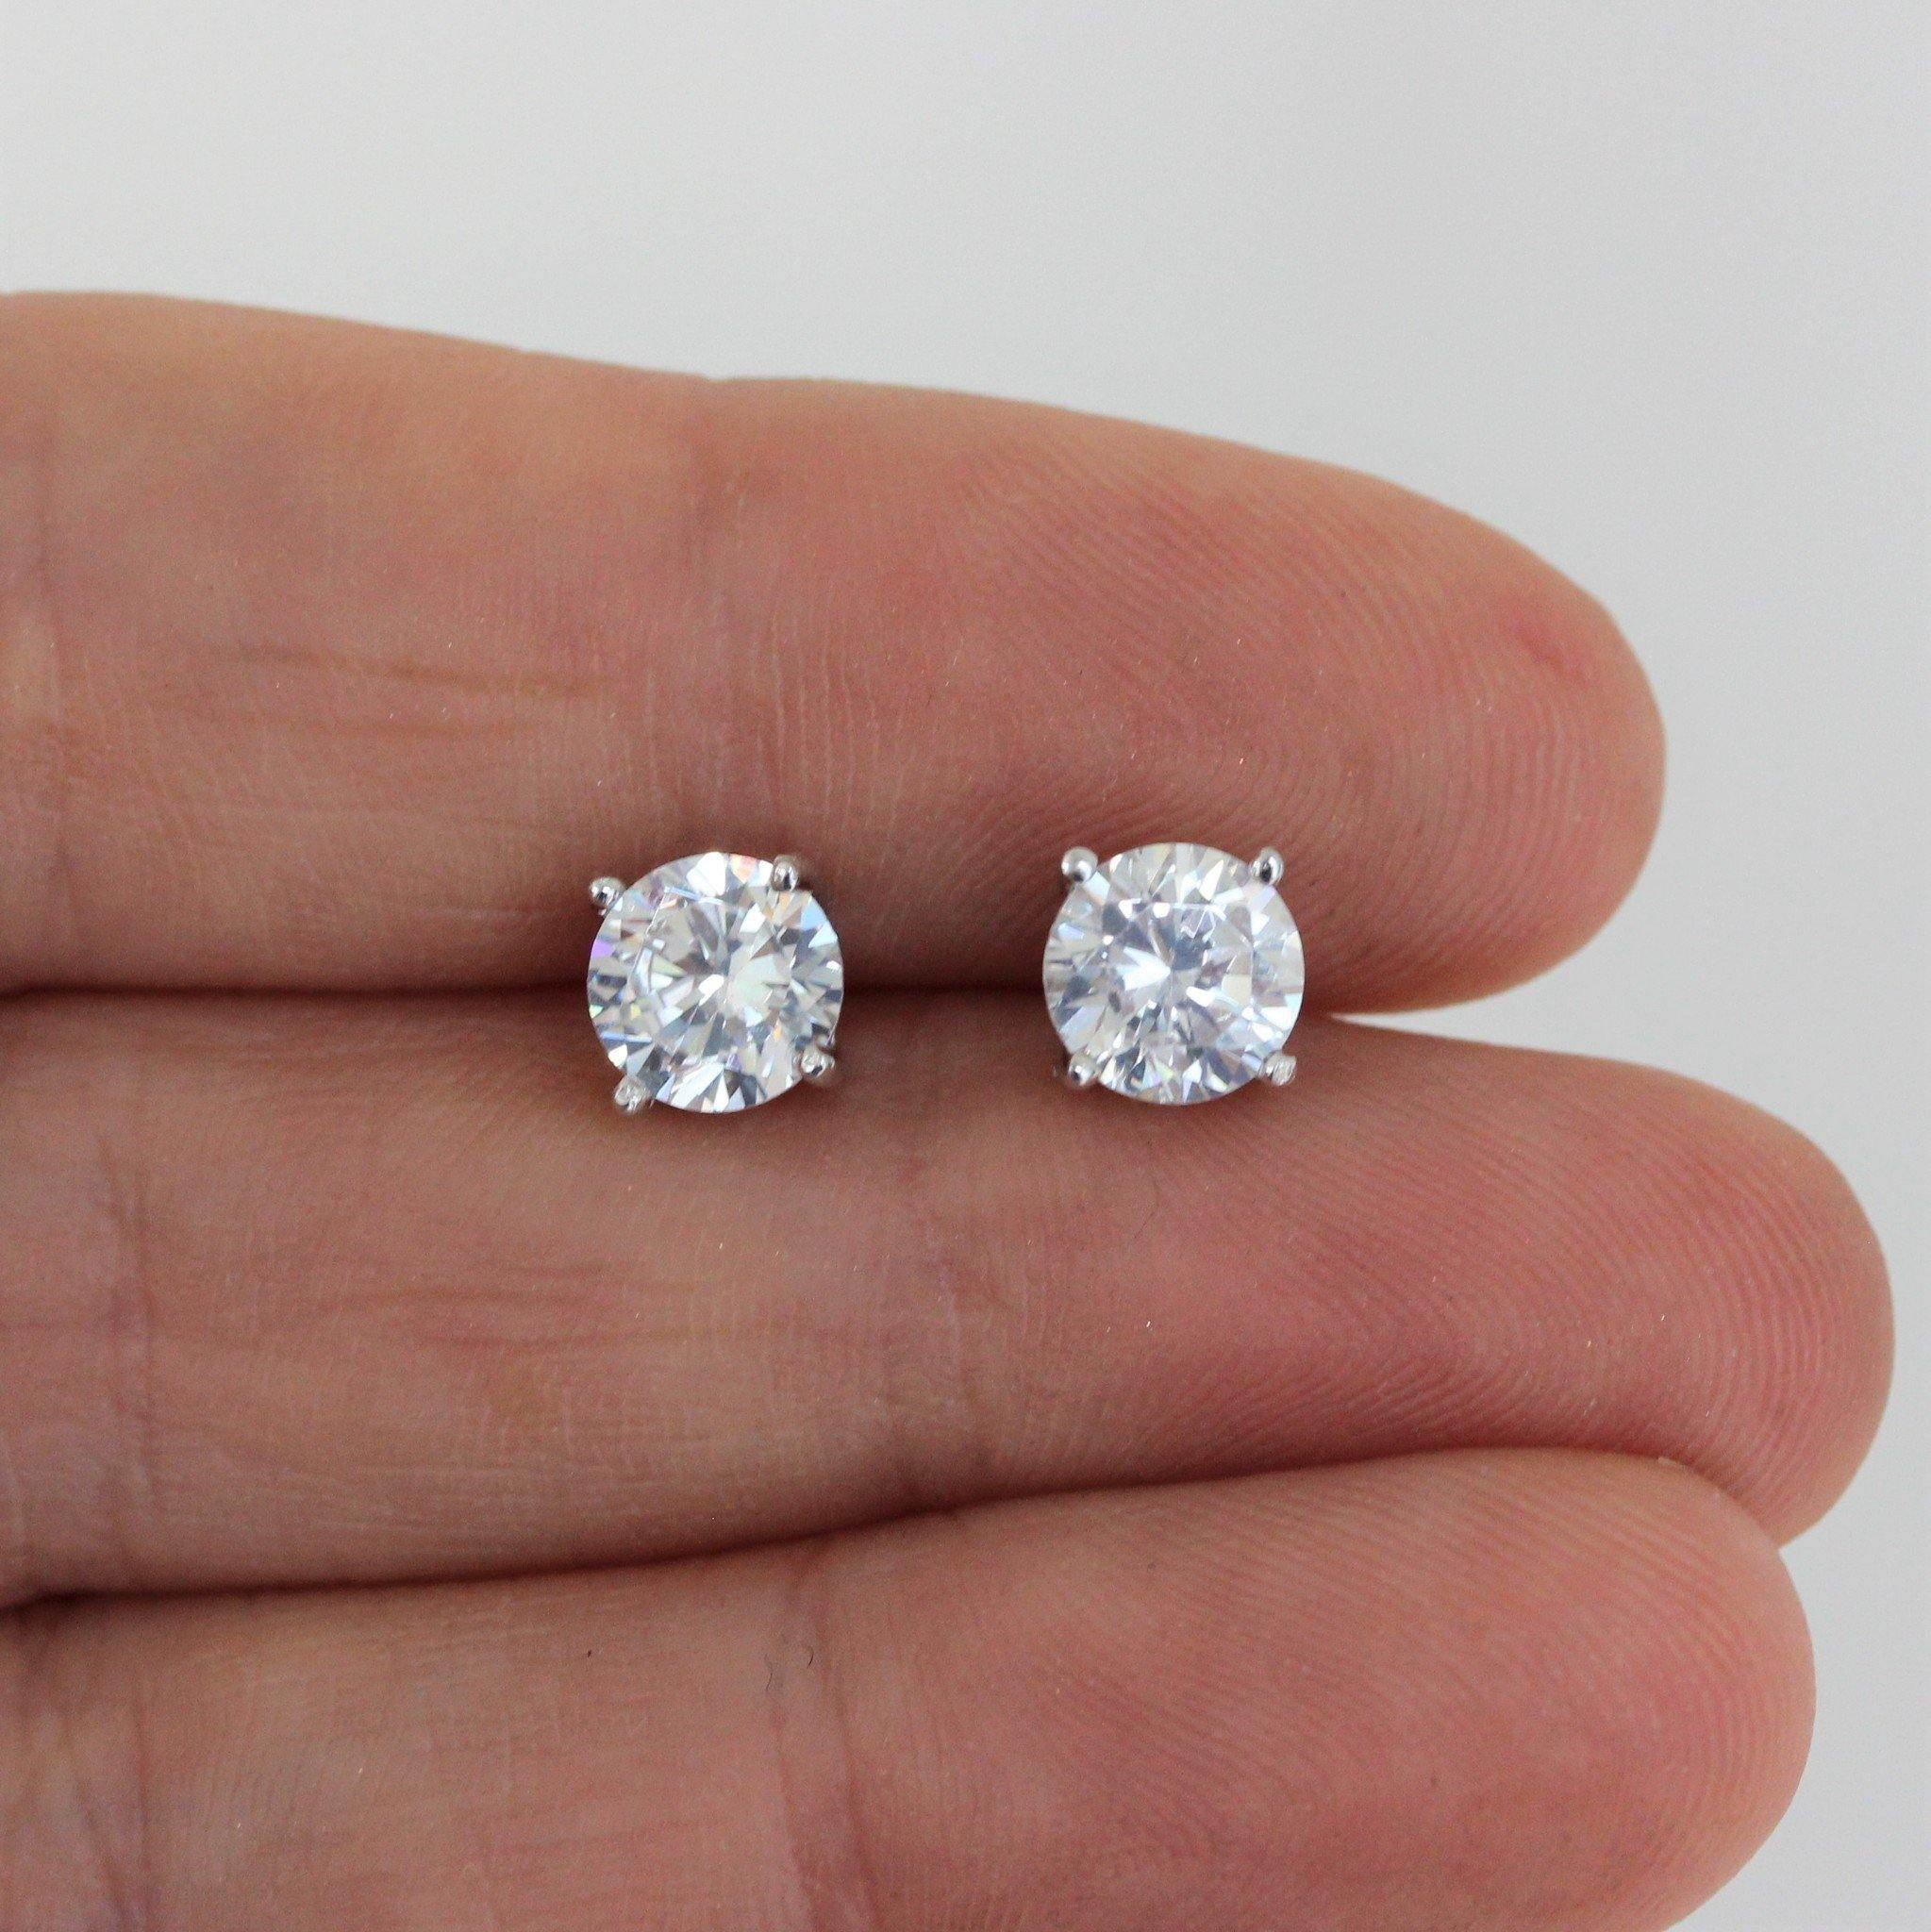 Sterling Silver Art Deco Inspired 6.5mm Round CZ Stud Post Earring - STERLING SILVER DESIGNS